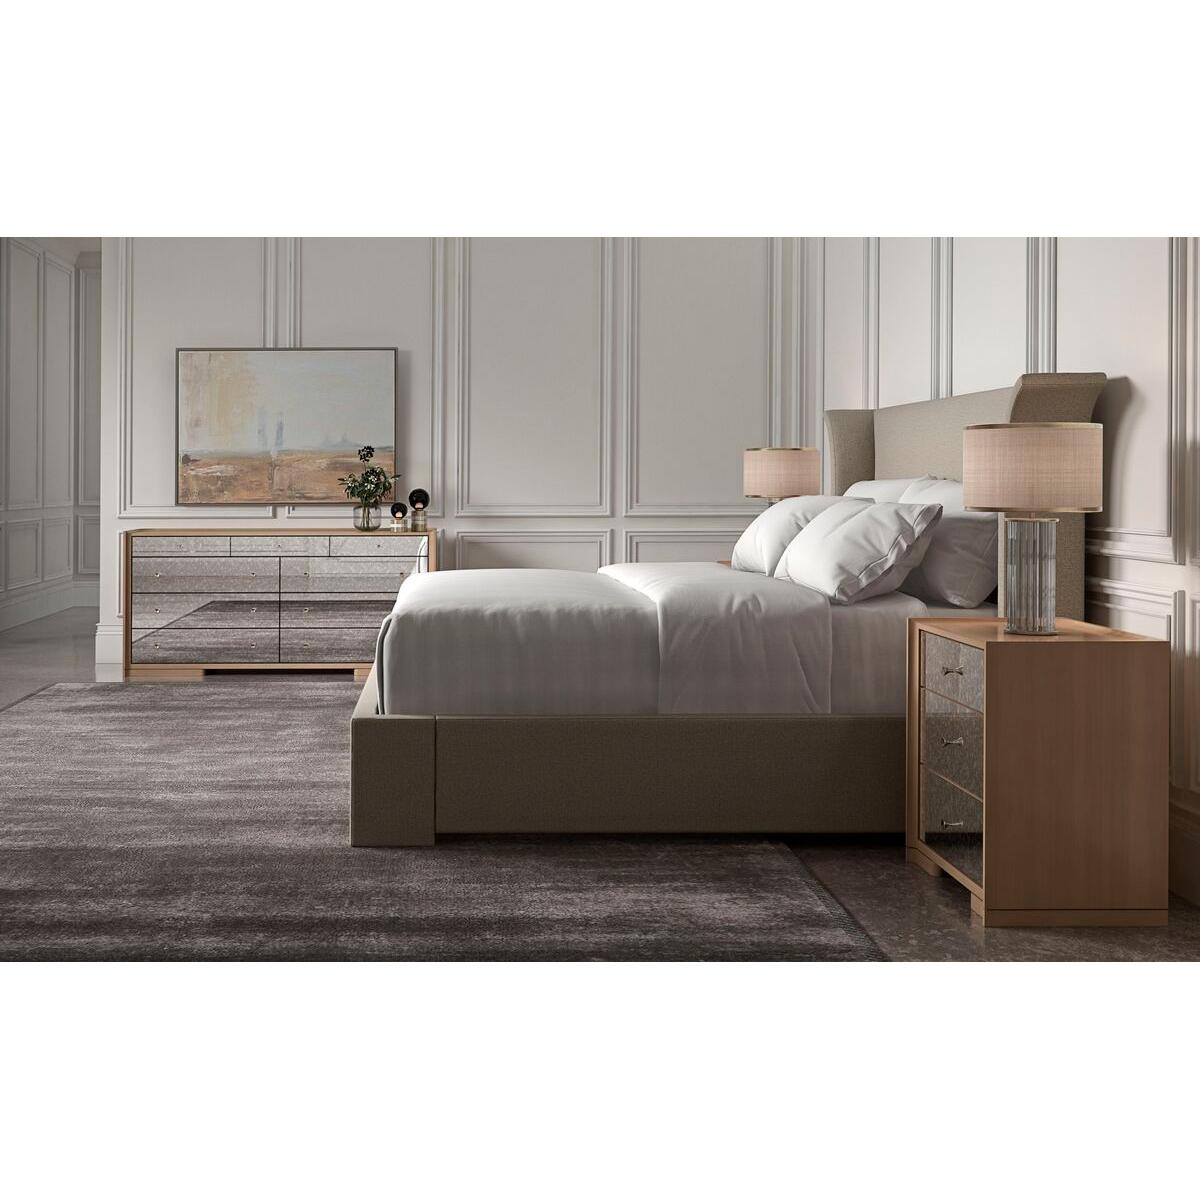 Vietnamese Flared Modern Fully Upholstered Queen Bed - Oatmeal For Sale